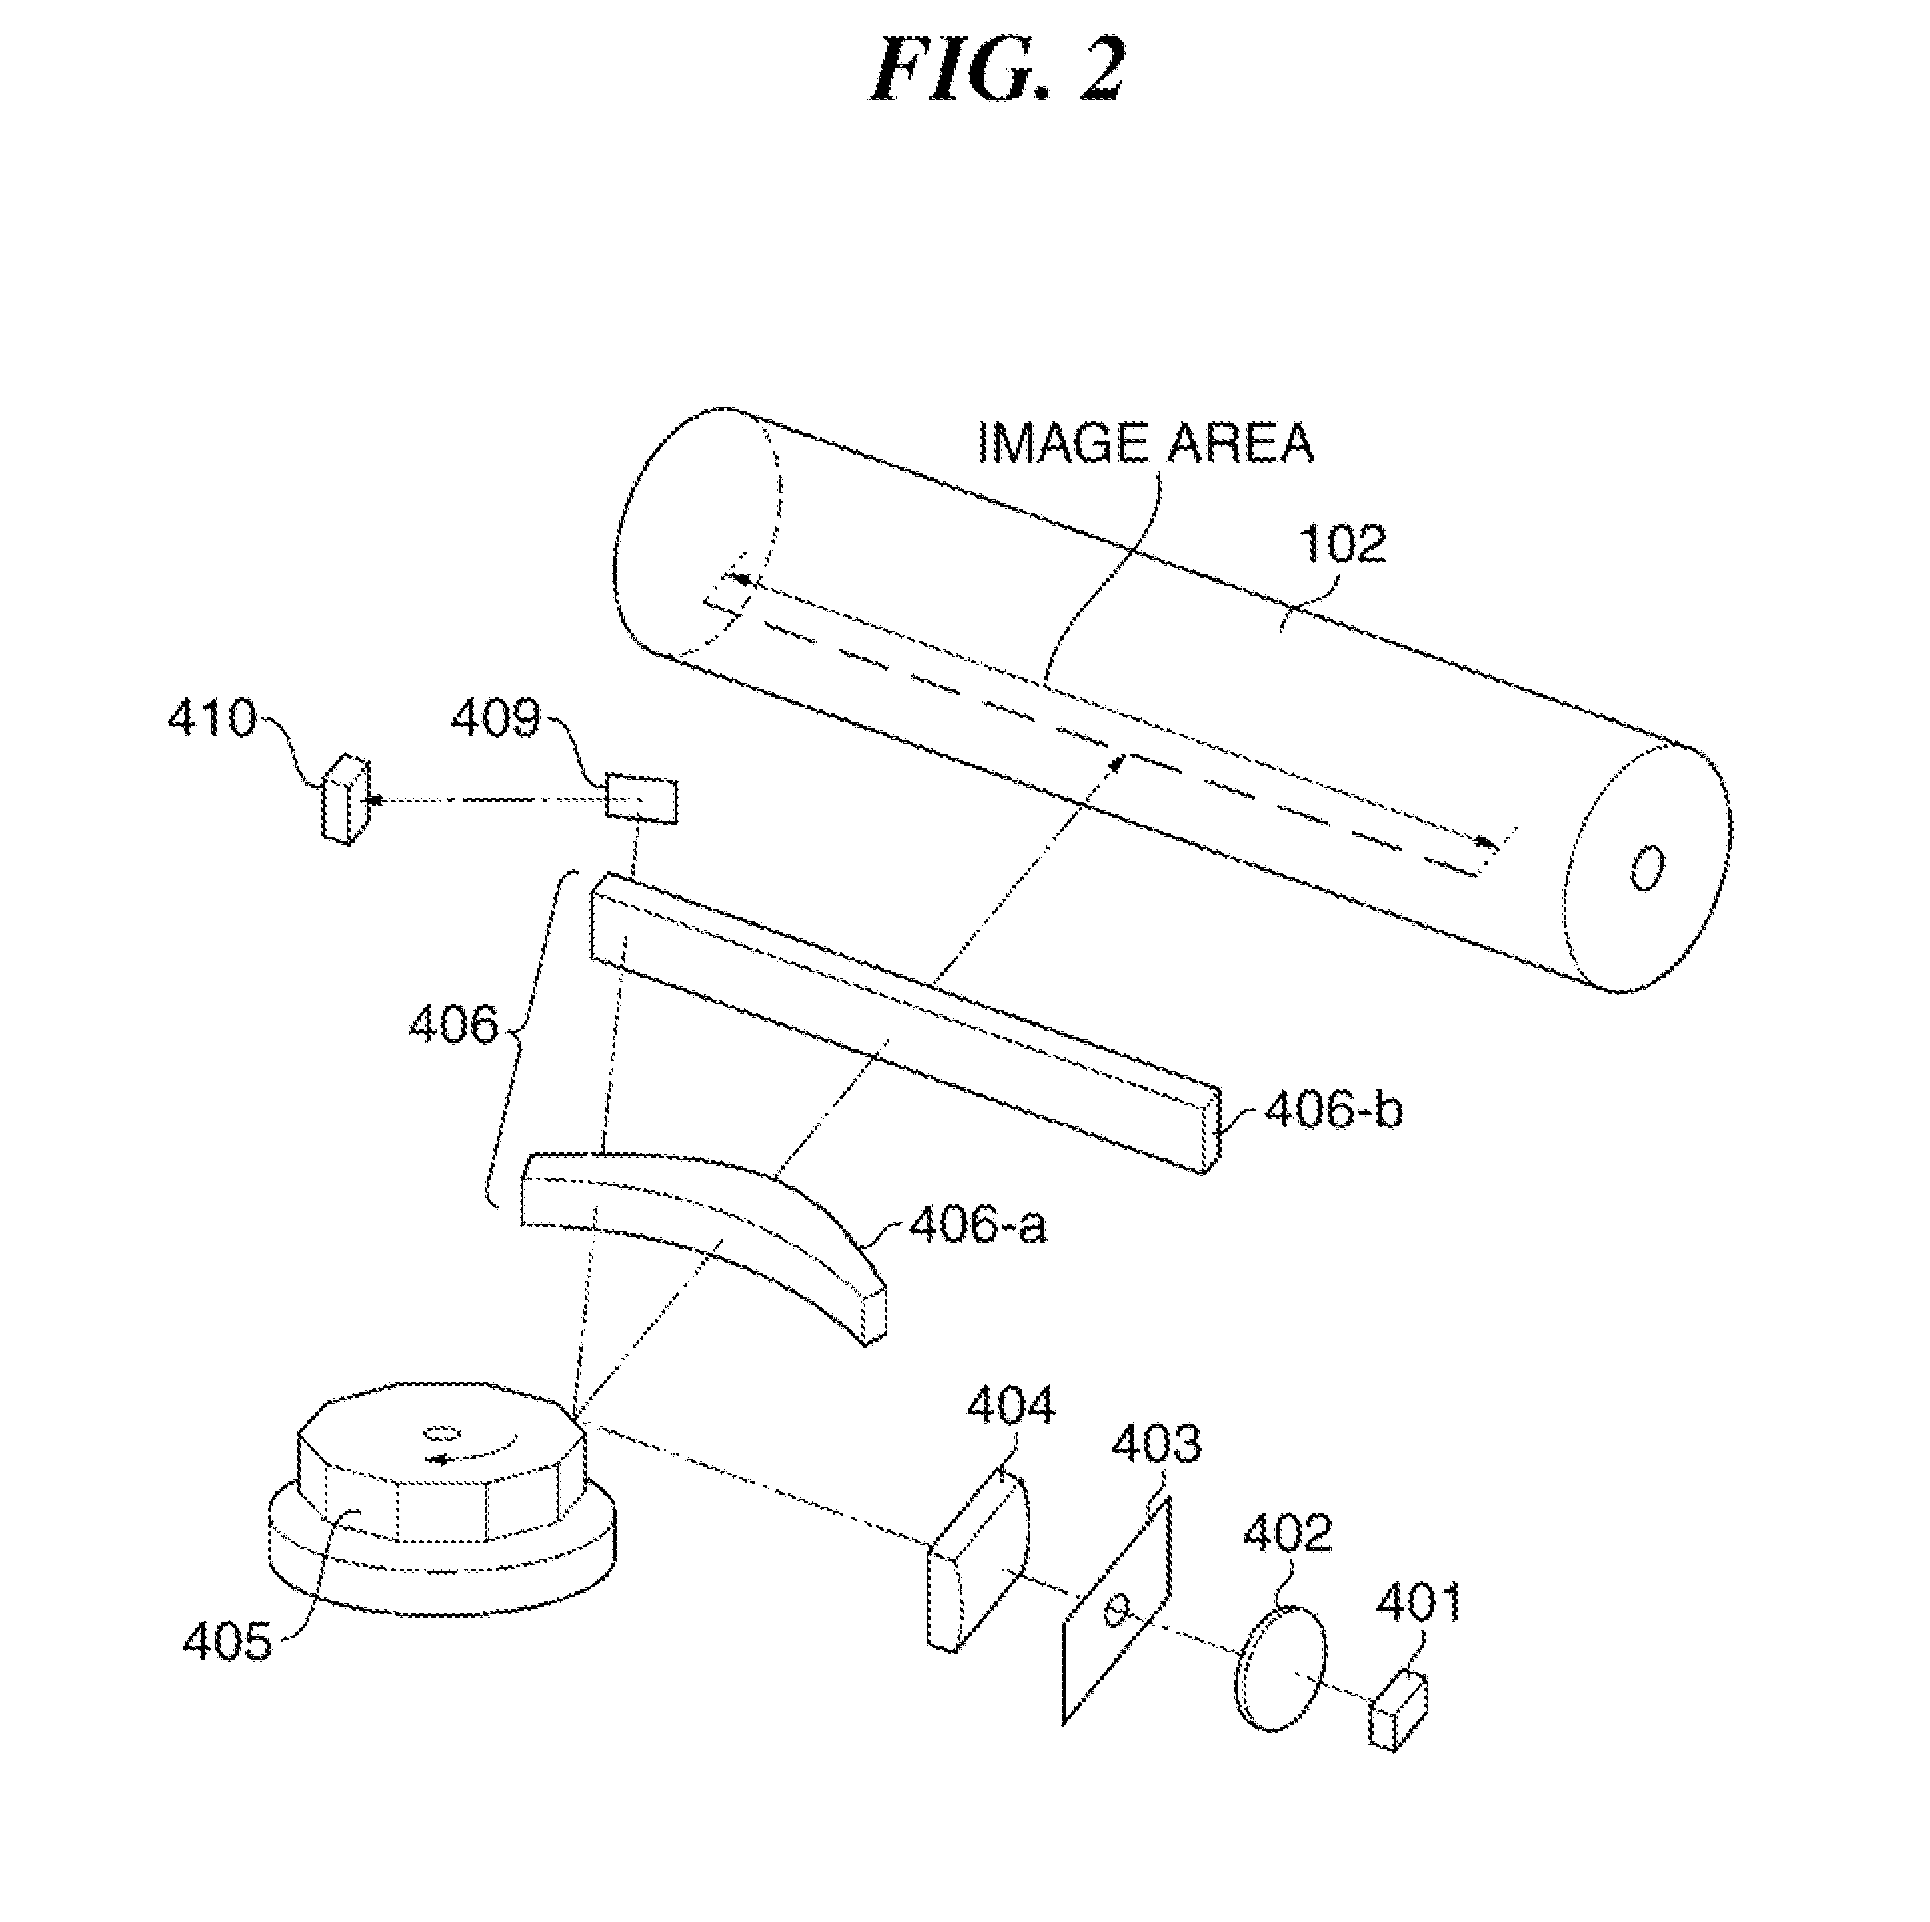 Image forming apparatus capable of correcting relative position between laser beams